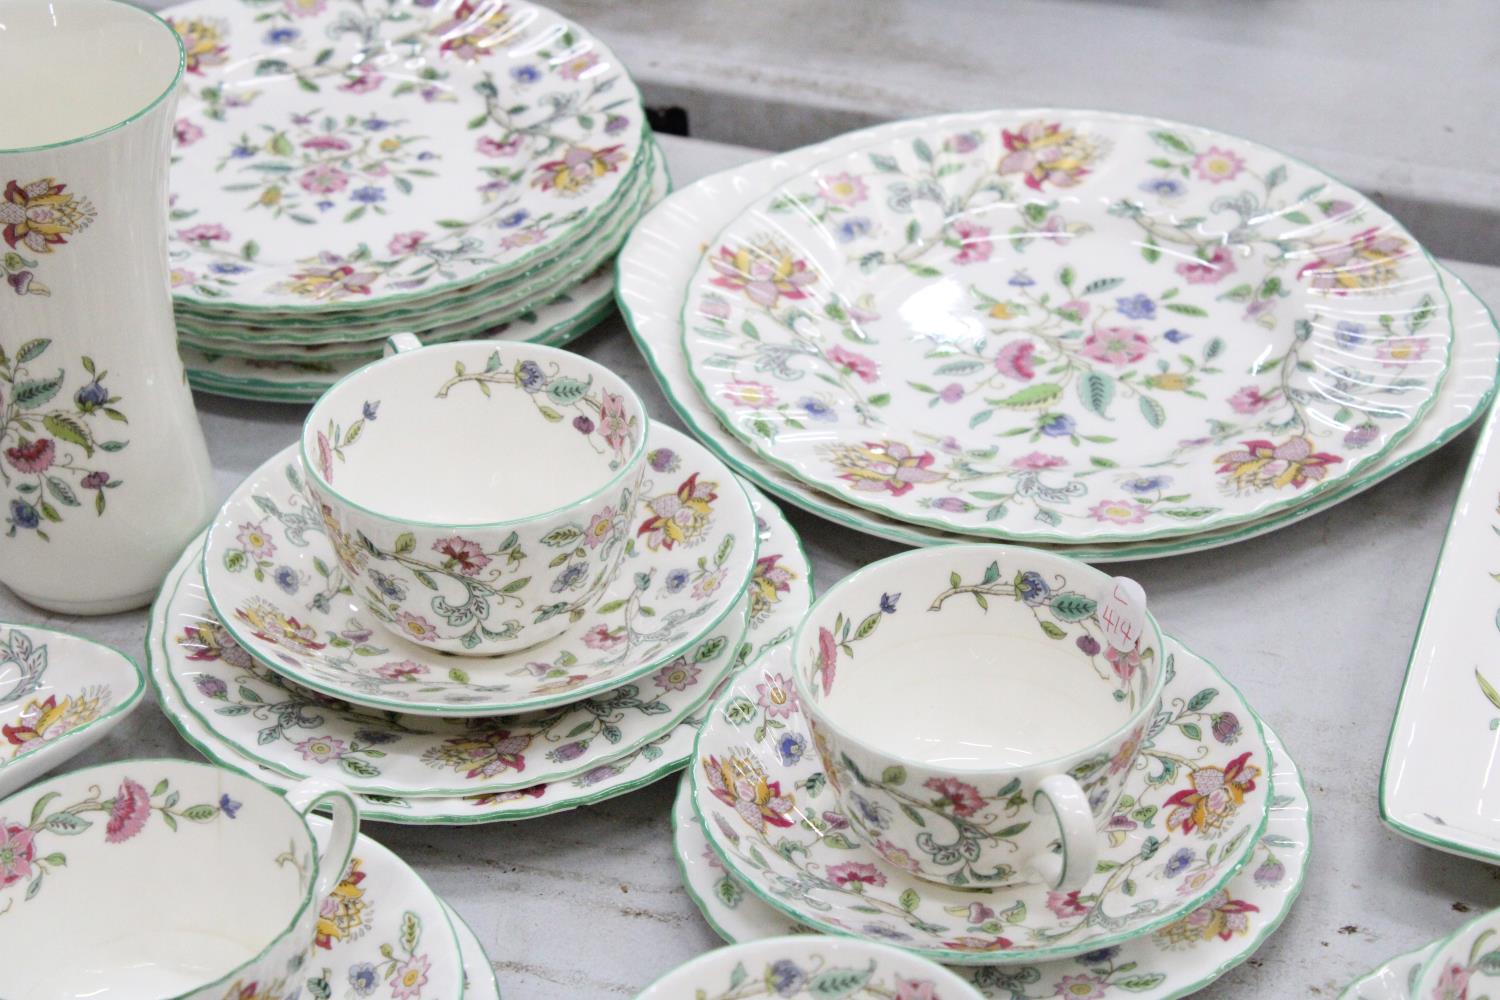 A LARGE MINTON "HADDON HALL" TEA SET TO INCLUDE CUPS, SAUCERS, SIDE PLATES, CAKE PLATES, SUGAR - Image 5 of 6